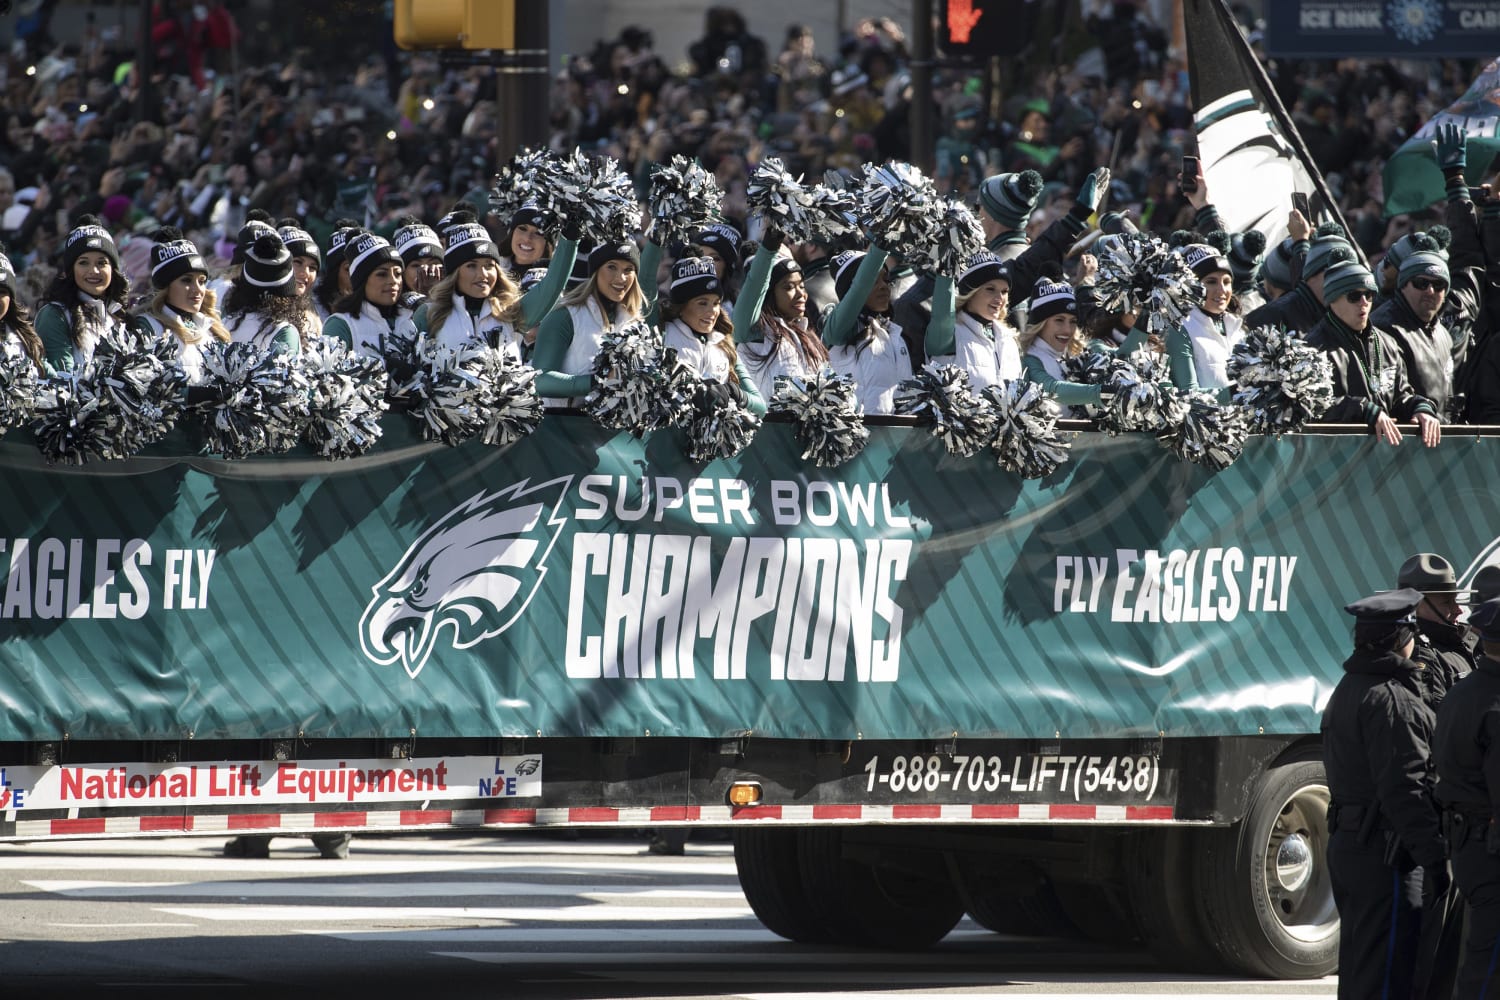 Relive the Philadelphia Eagles Super Bowl parade with the best